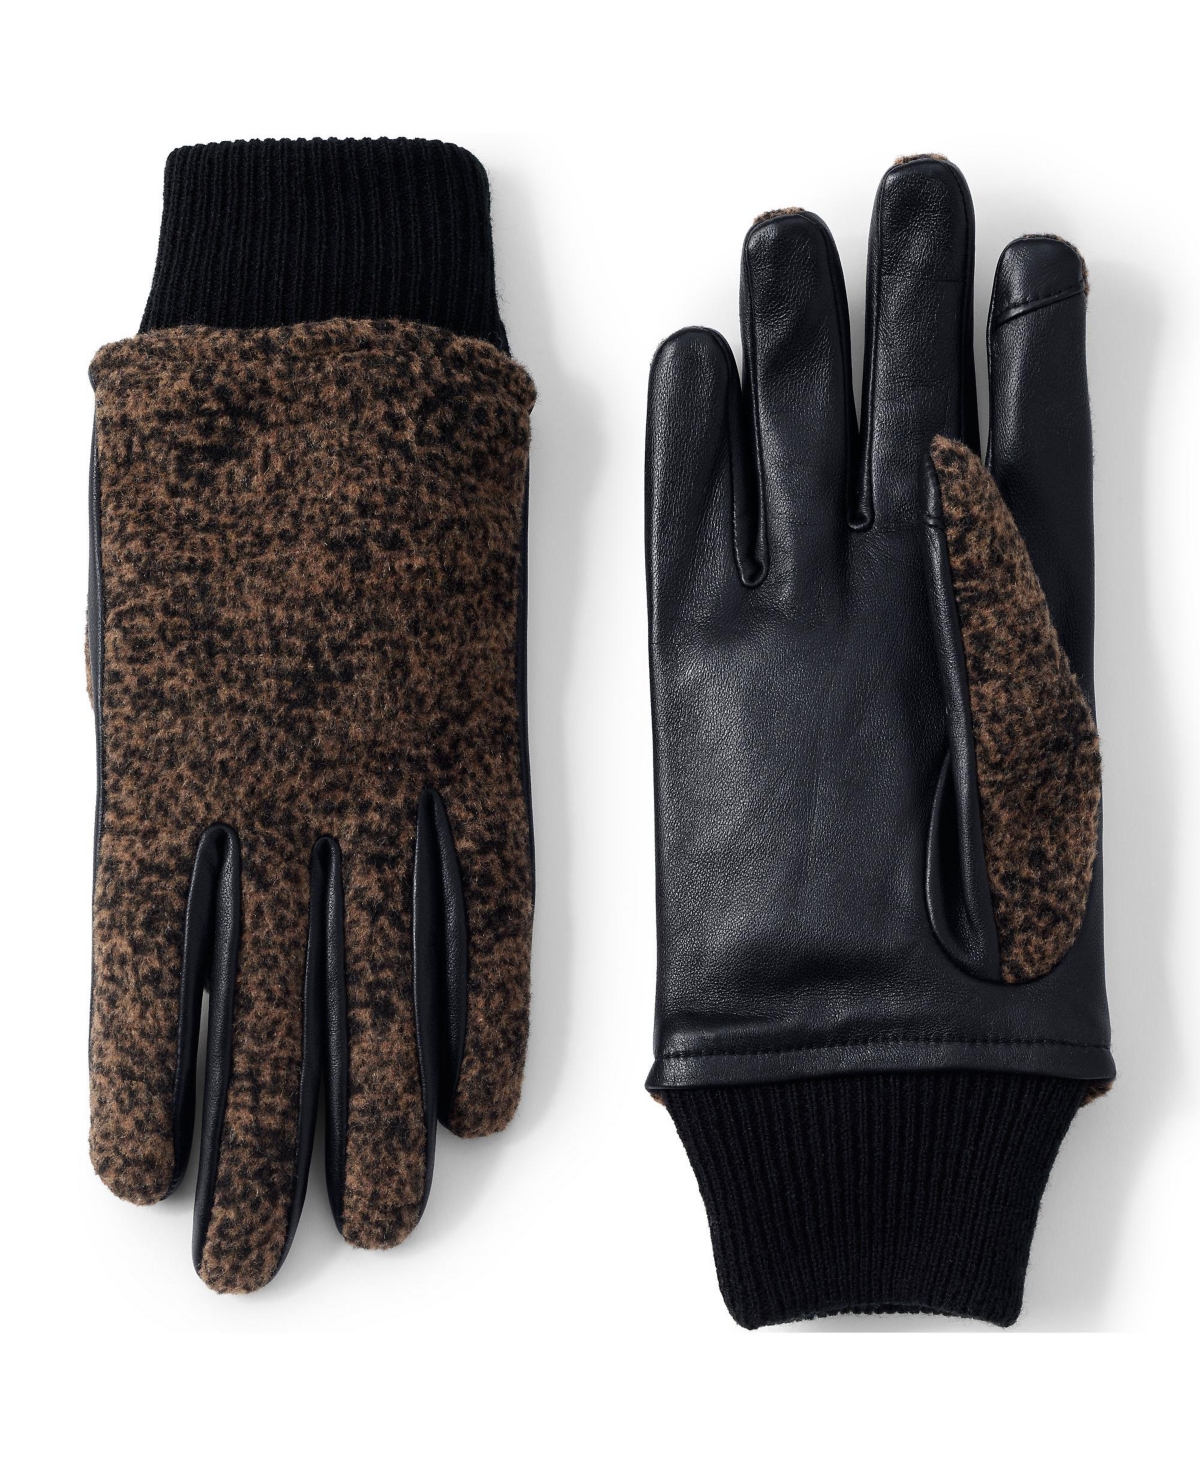 Women's Ez Touch Screen Lined Leather Gloves - Black houndstooth